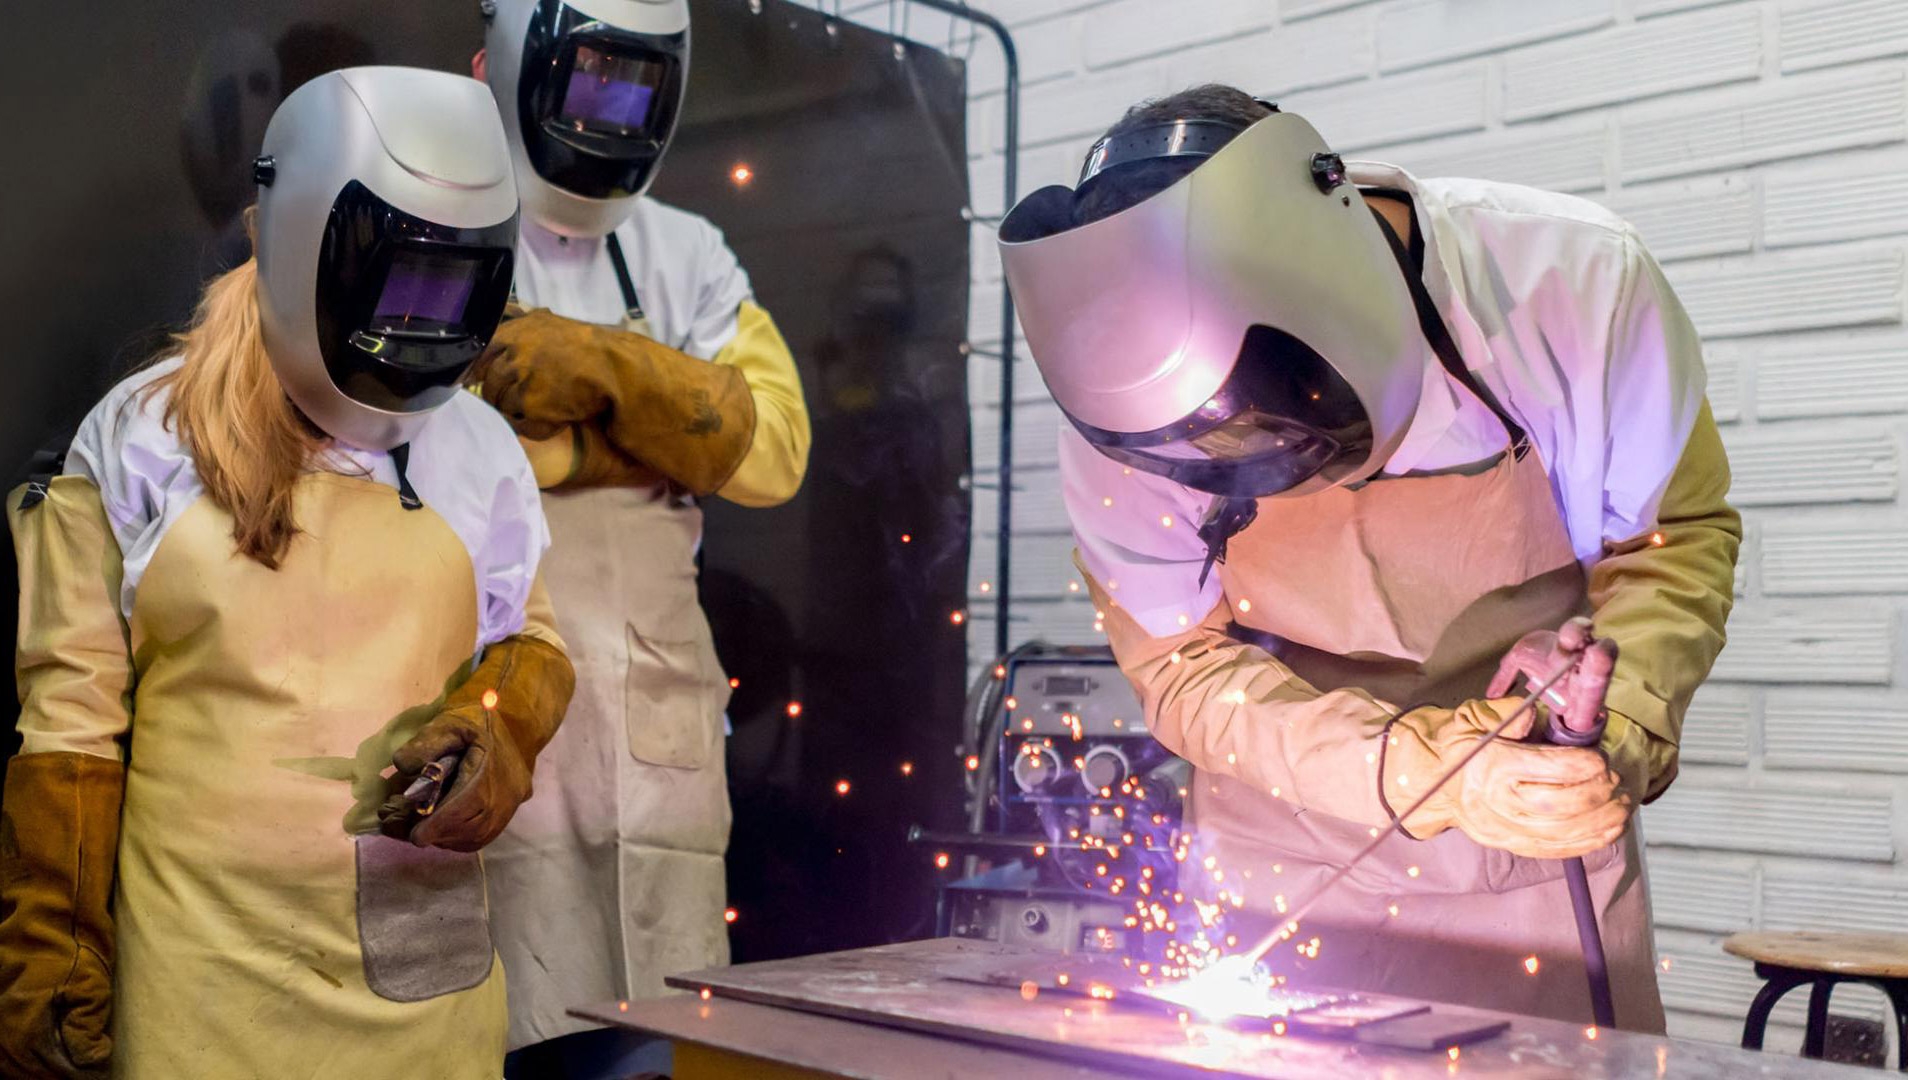 Three students in welding uniforms and helmets, one of them is welding metal pieces together on a surface in front of them.